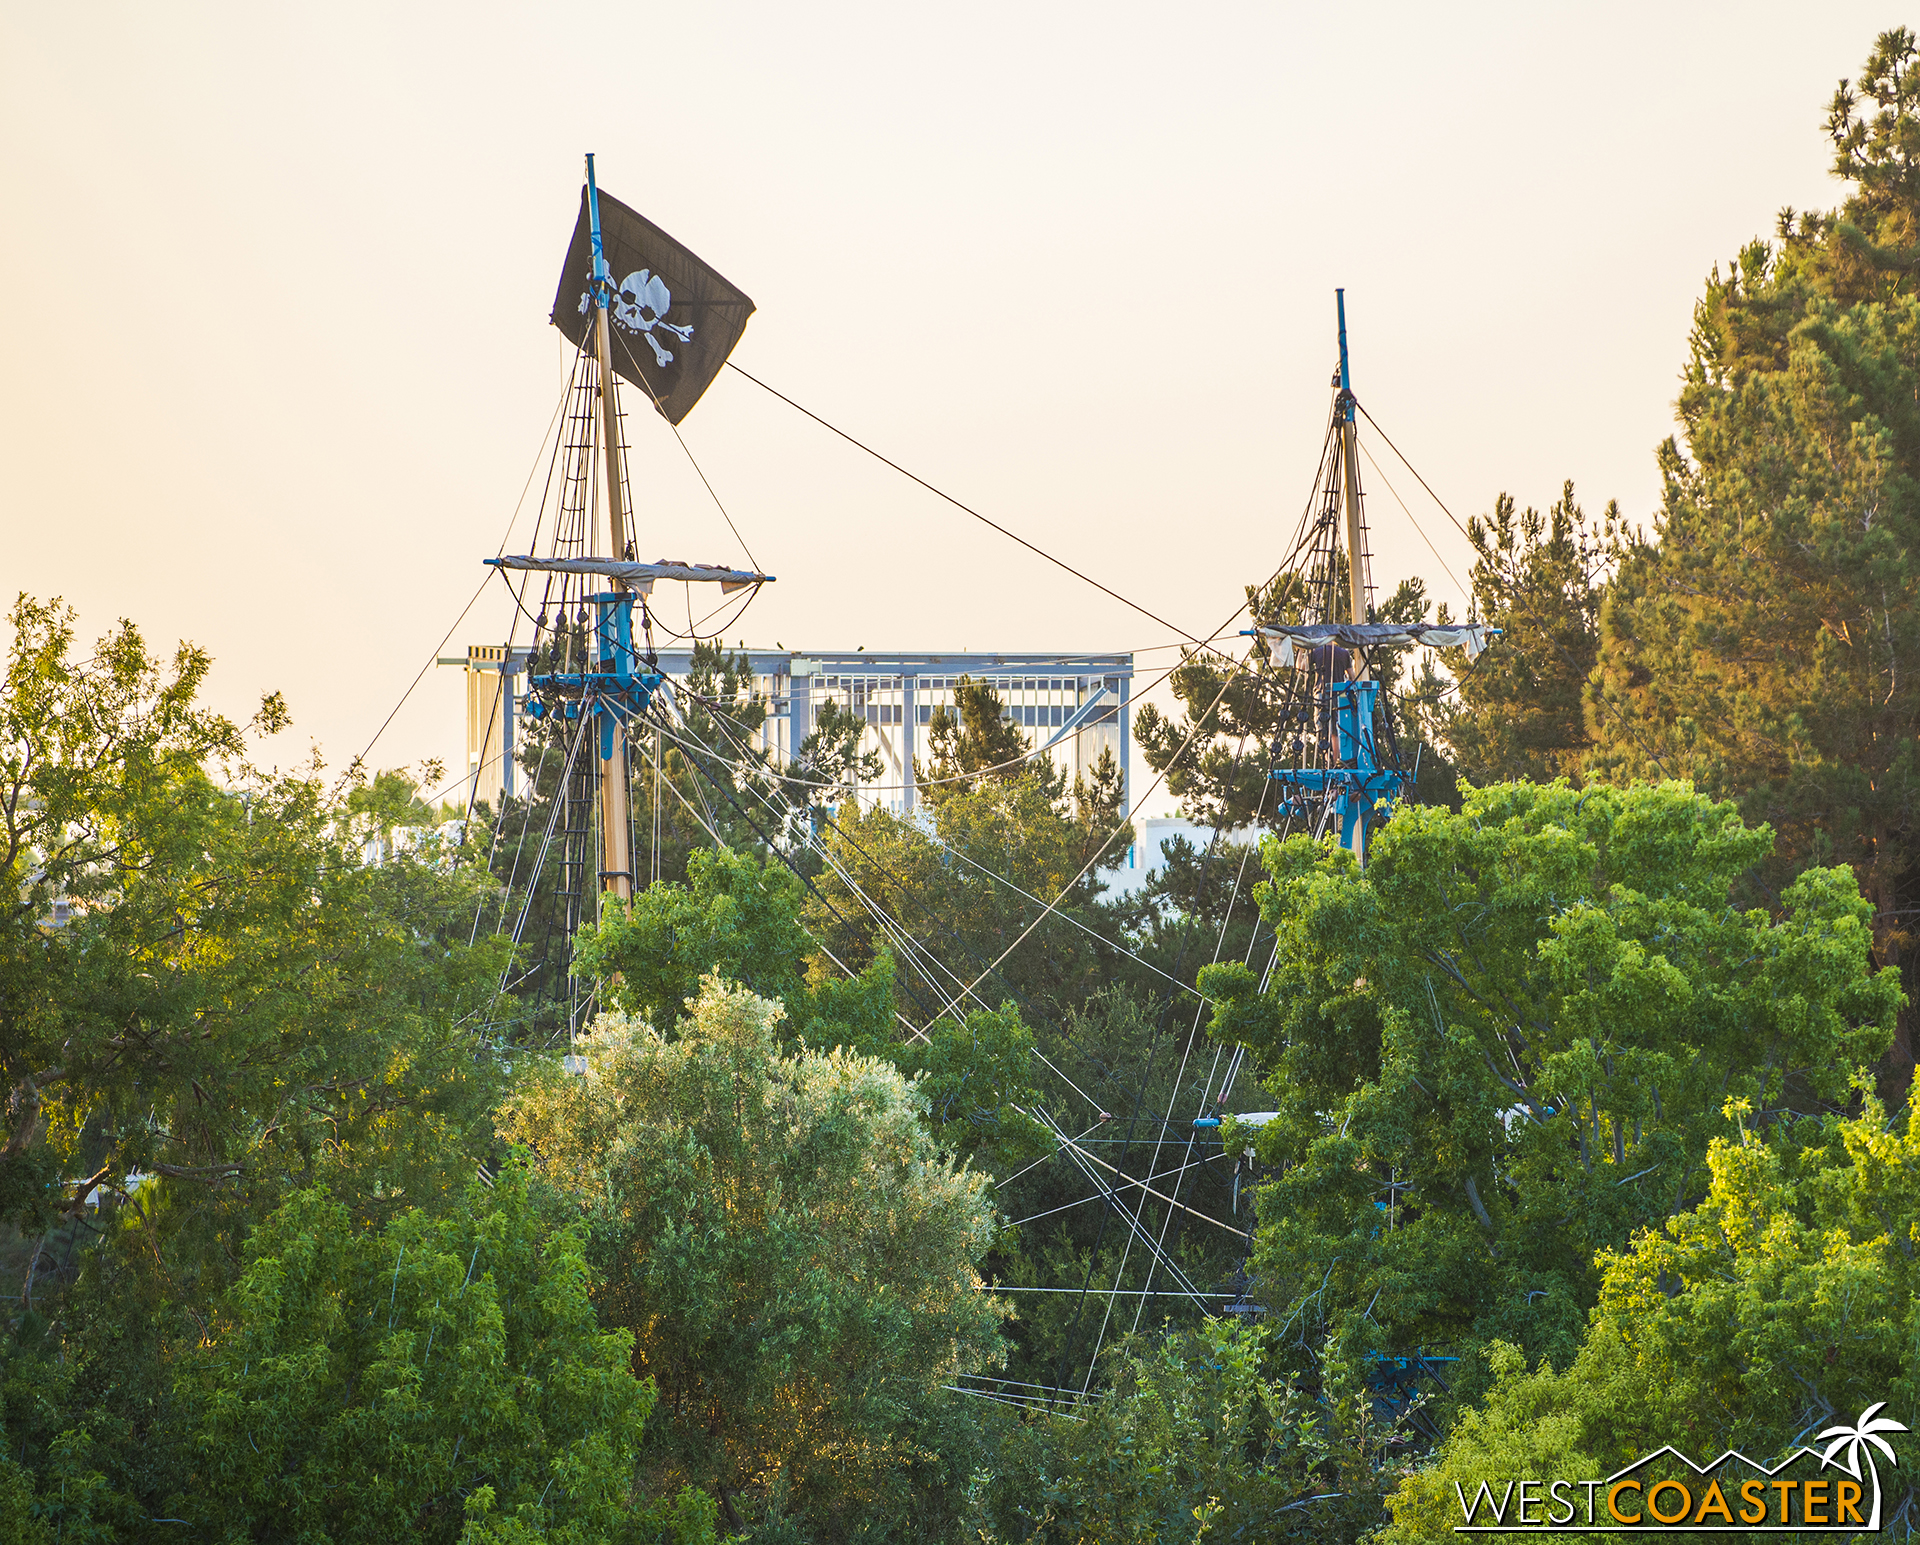  From Tarzan's Treehouse, the structure can be seen over the trees. 